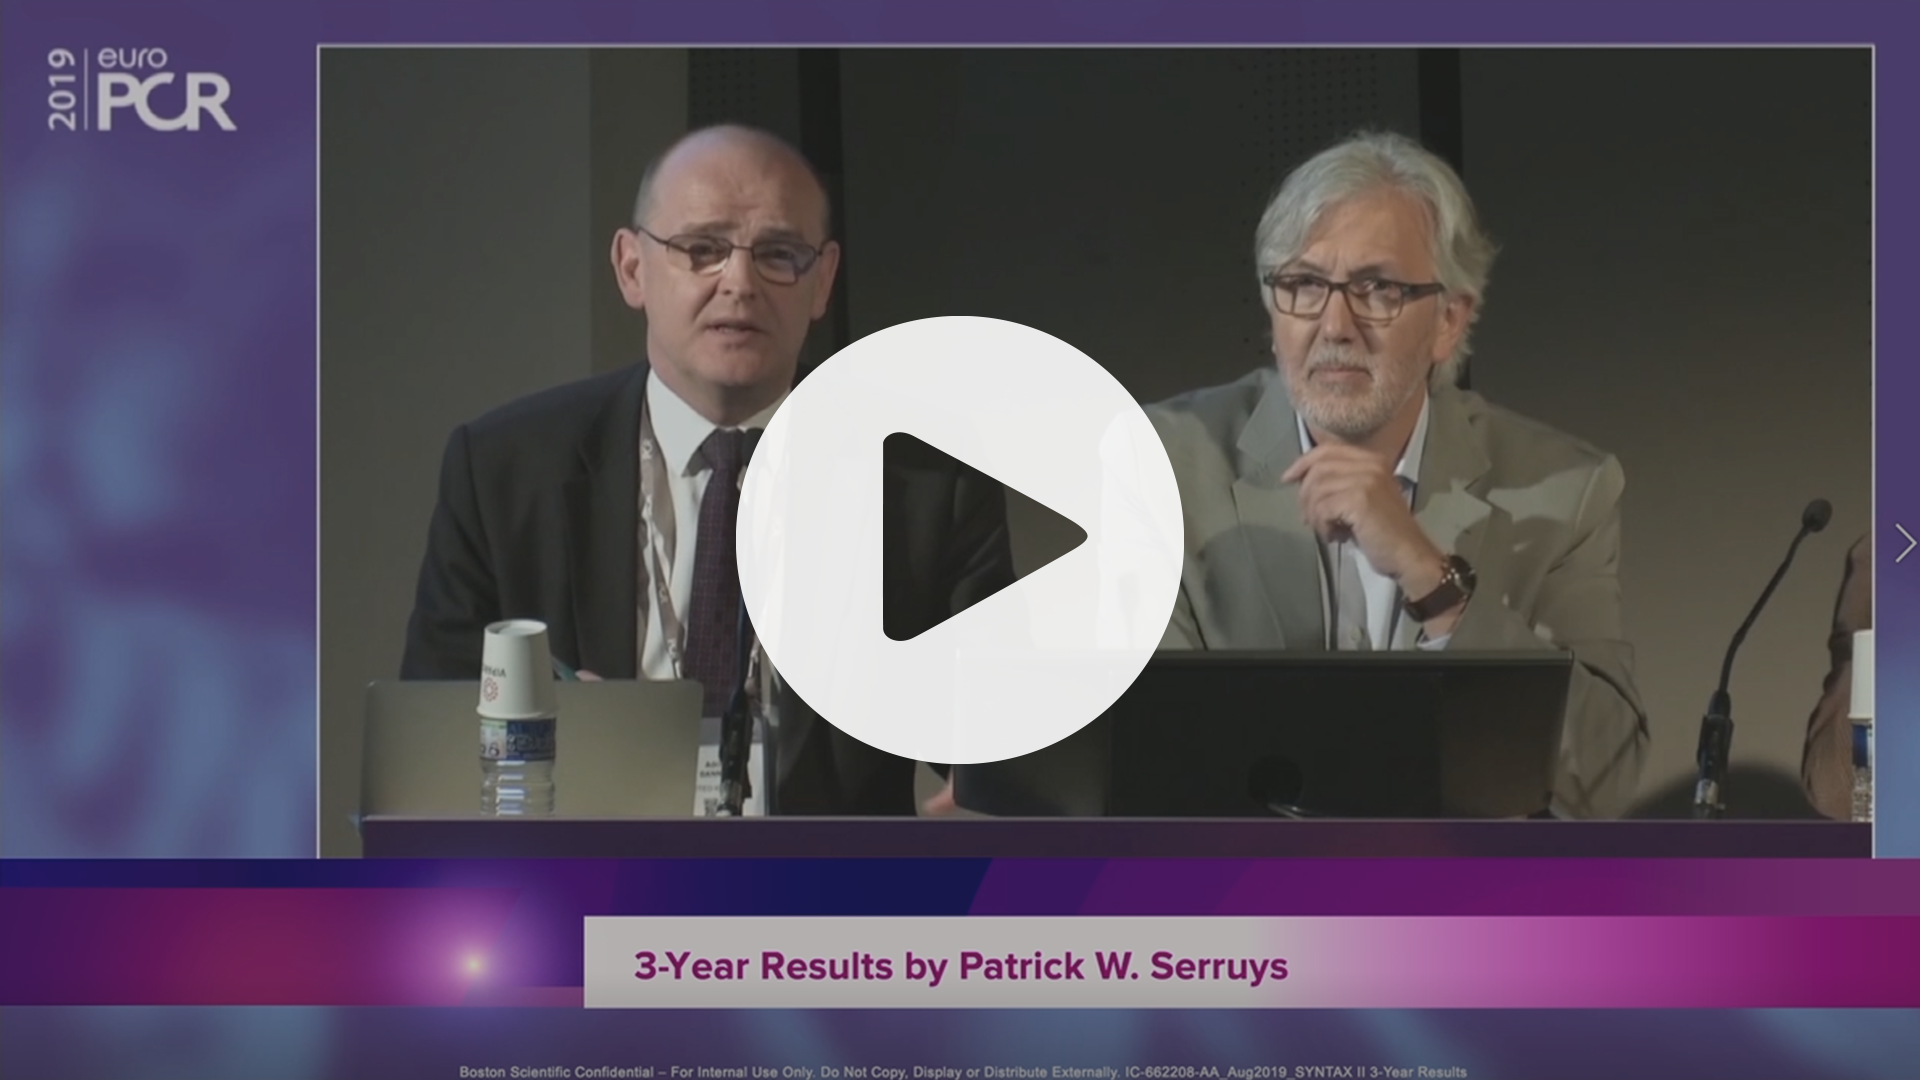 SYNTAX II 3-year Results by Patrick W Serruys, VIdeo